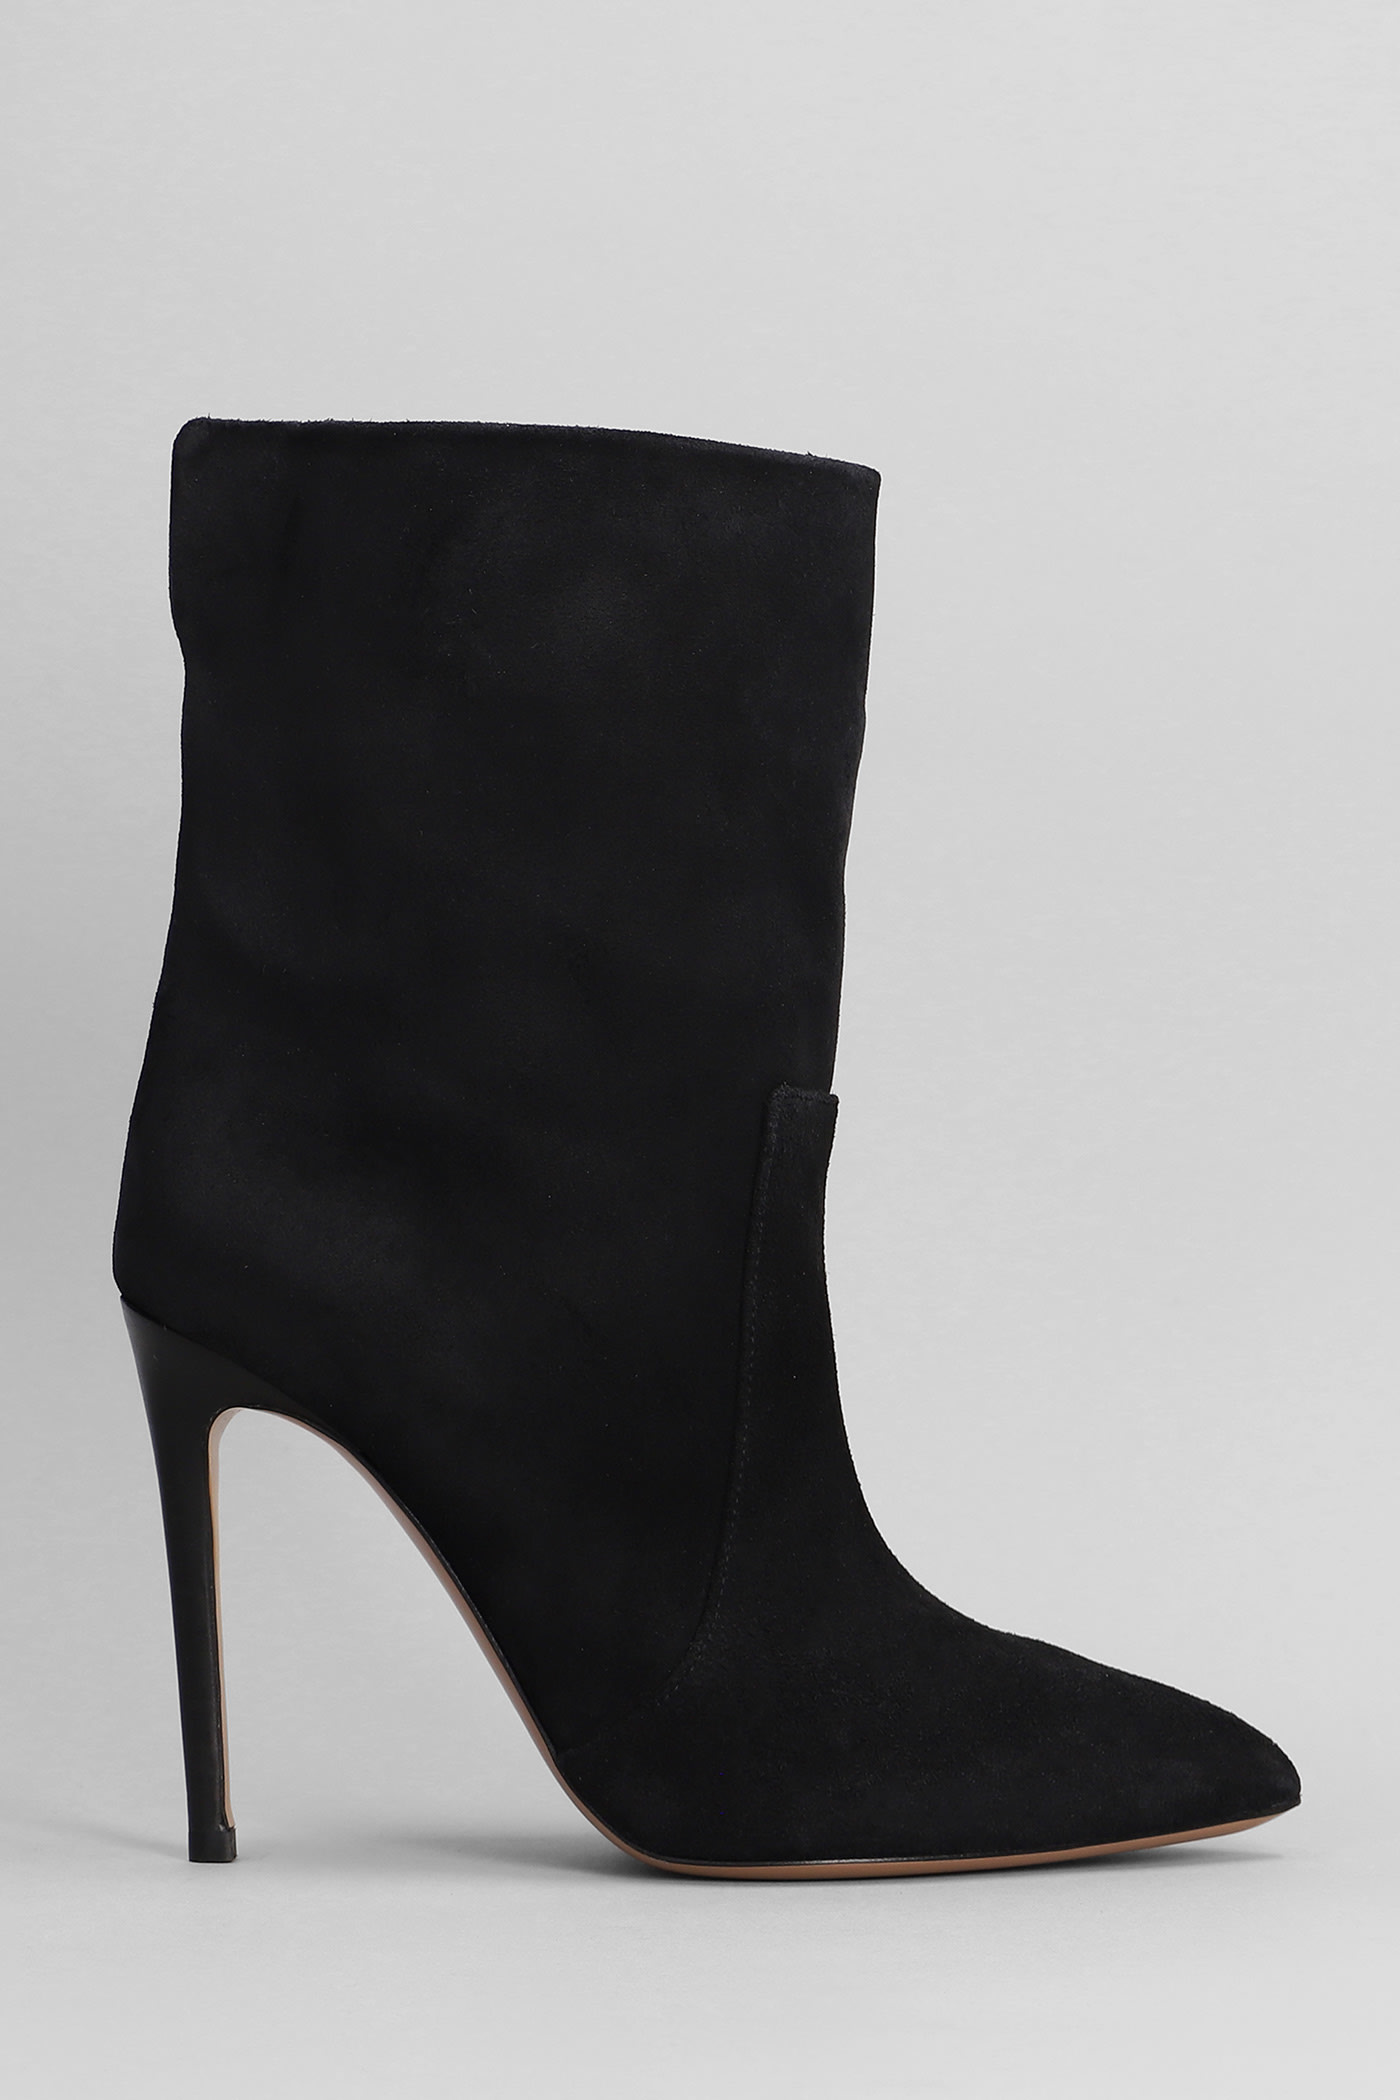 PARIS TEXAS HIGH HEELS ANKLE BOOTS IN BLACK SUEDE